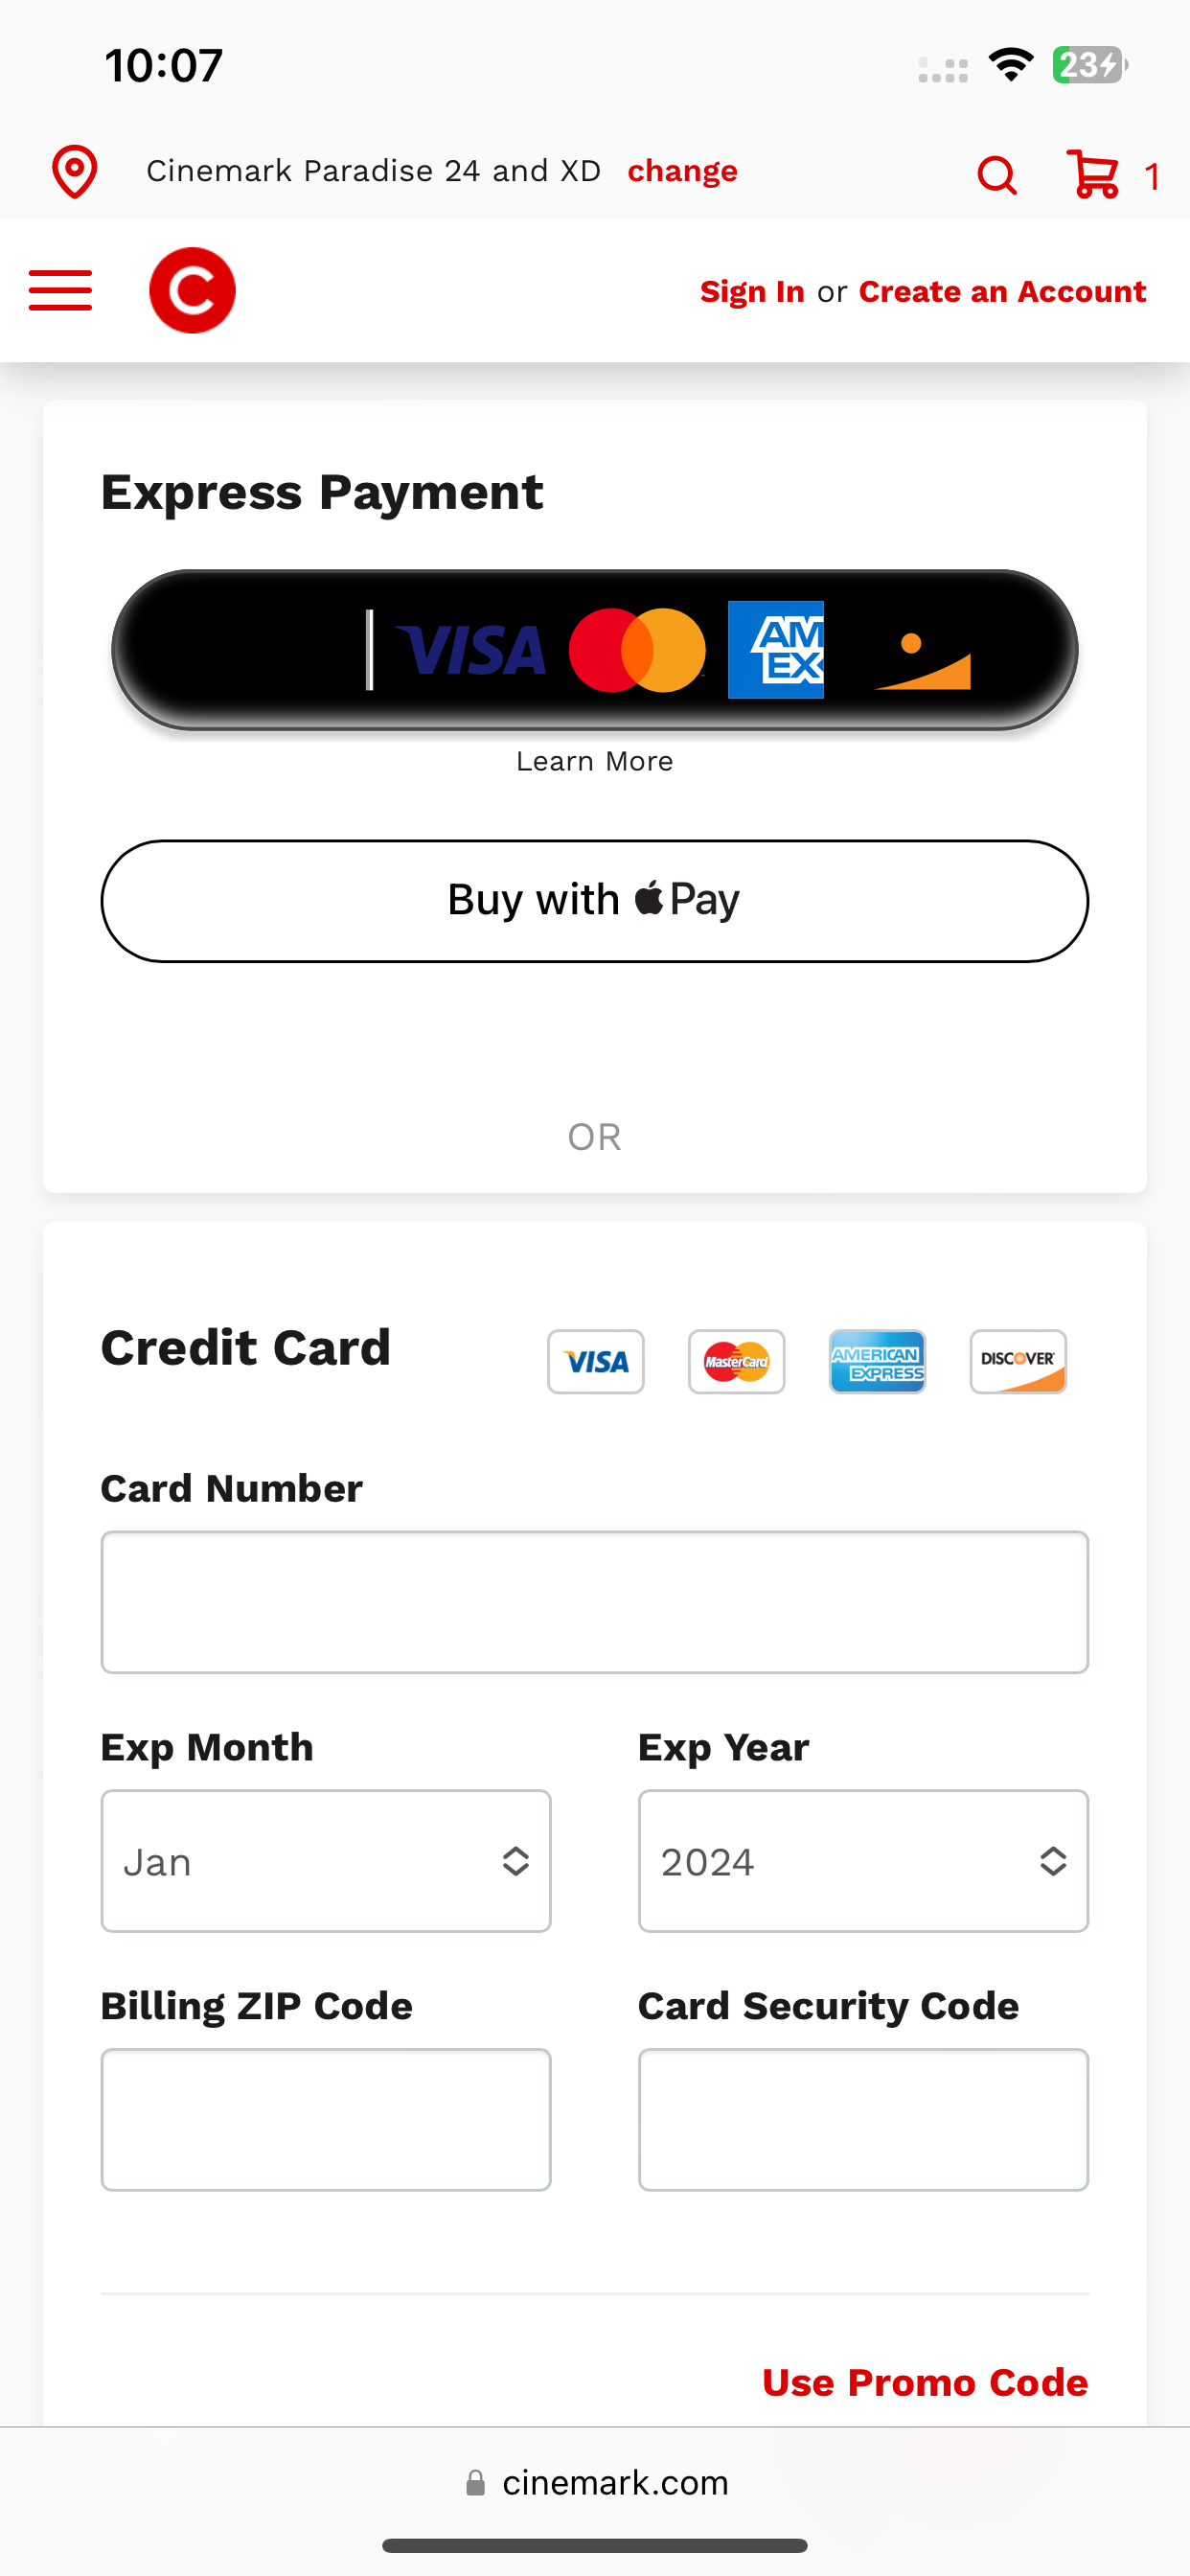 Cinemark accepts Apple Pay on its website.